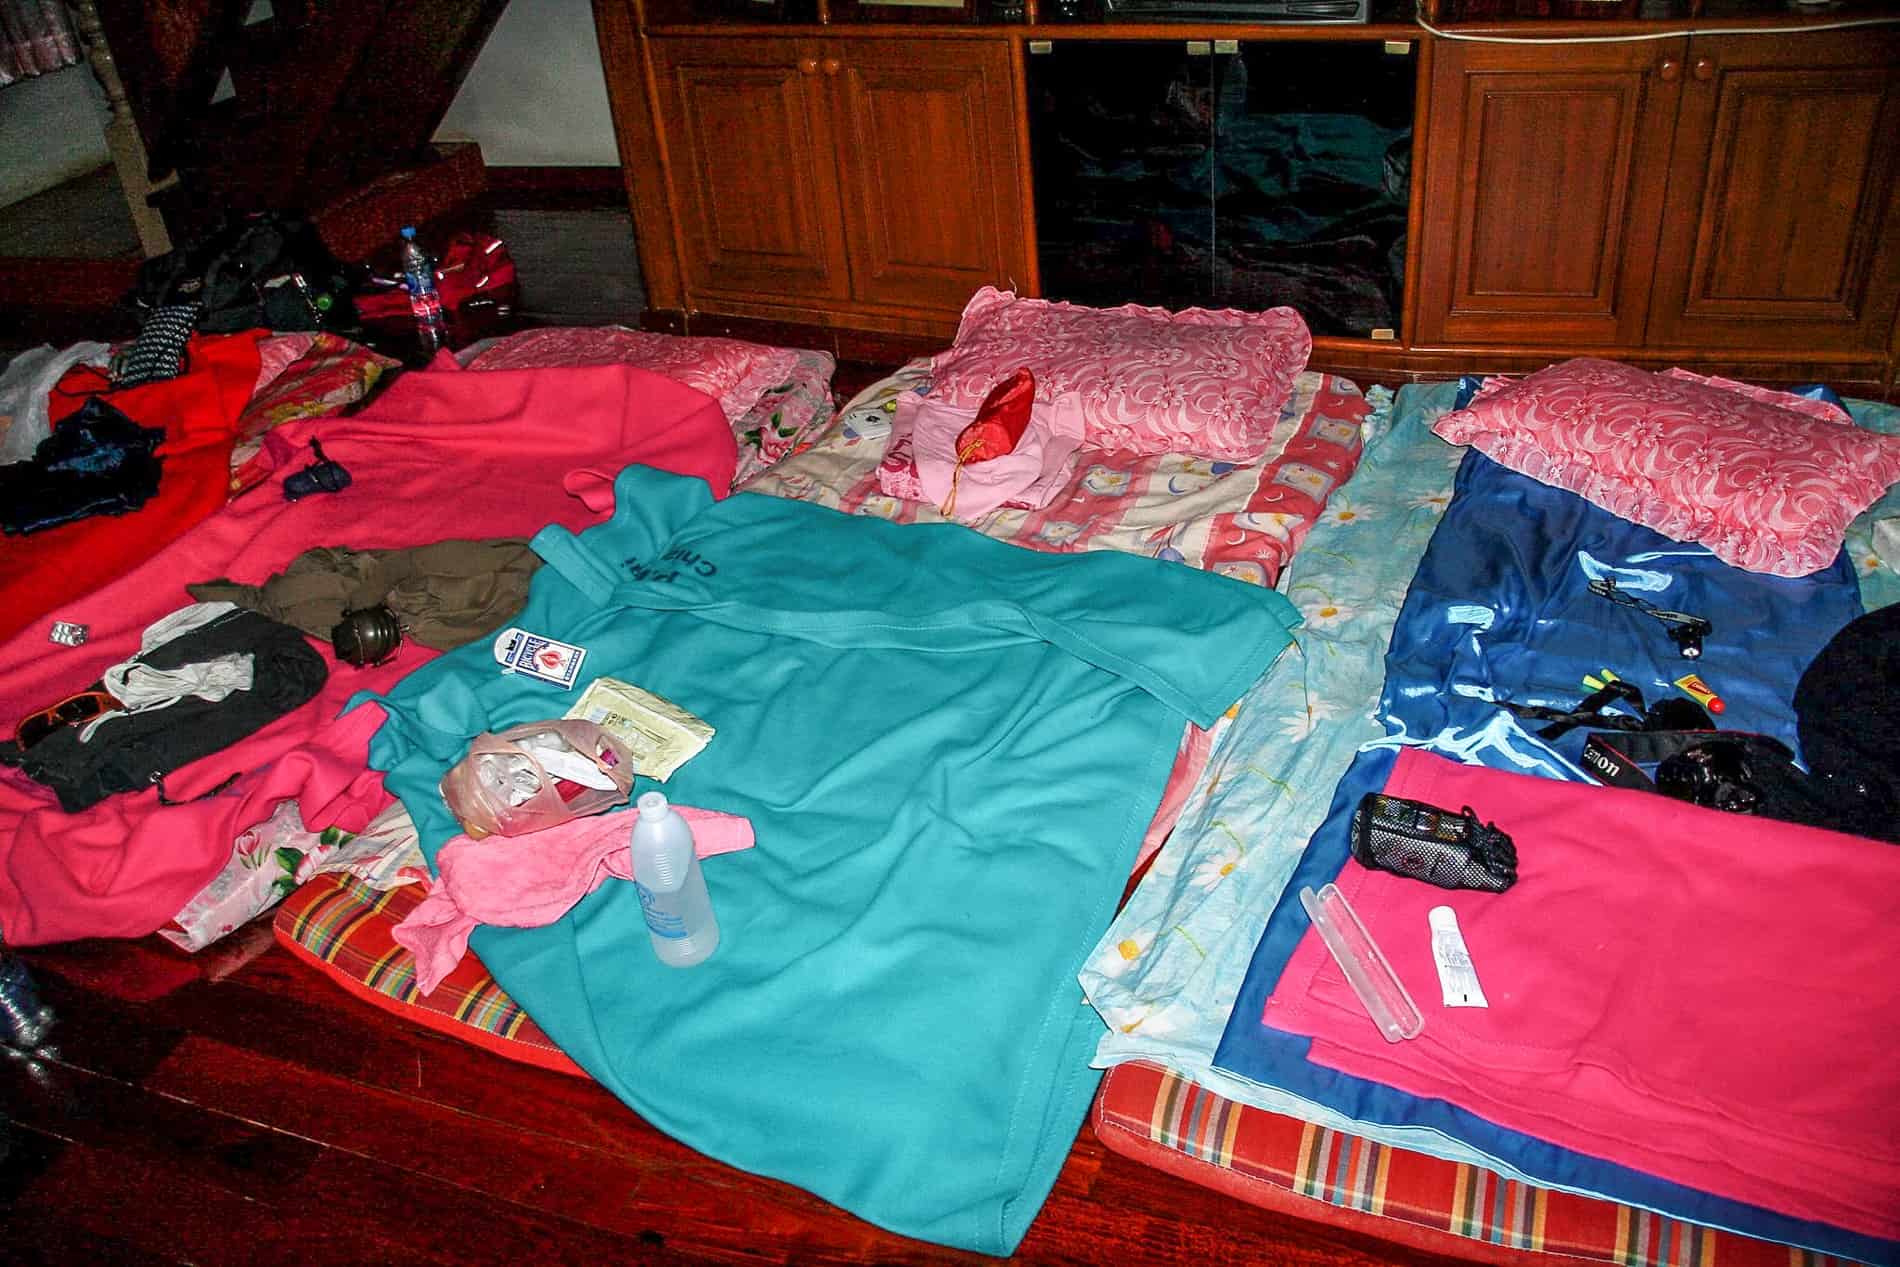 A row of sleeping mats with pink and blue blankets, strewn with travel gear and amenities, on a floor in a house in Thailand. 